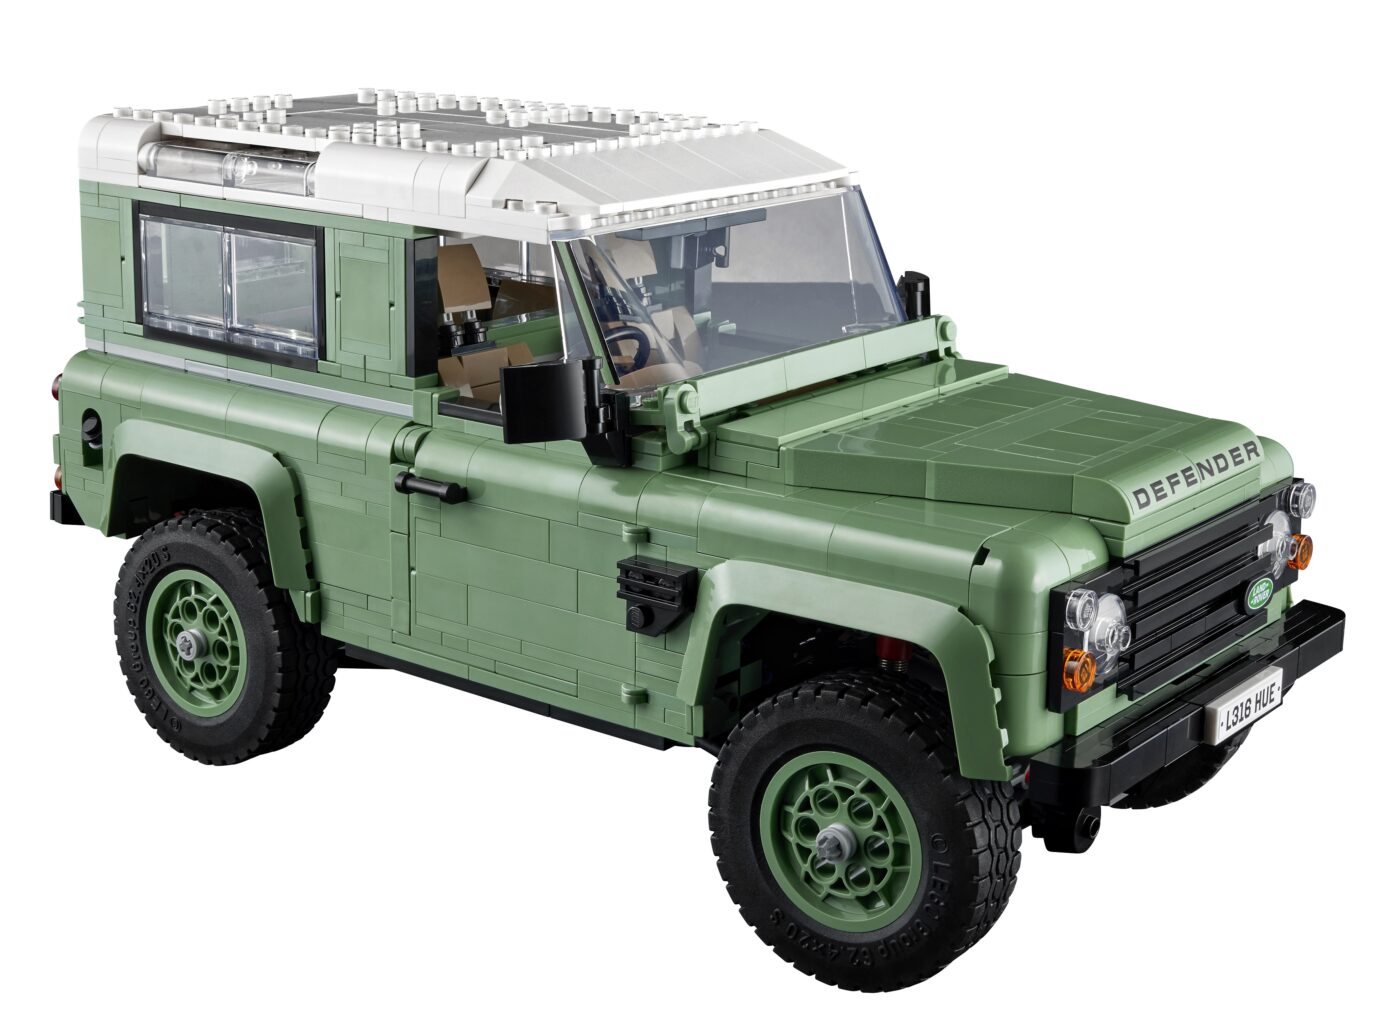 10317-Land-Rover-Defender-90-Clean-Side-View-1400x1020.jpg